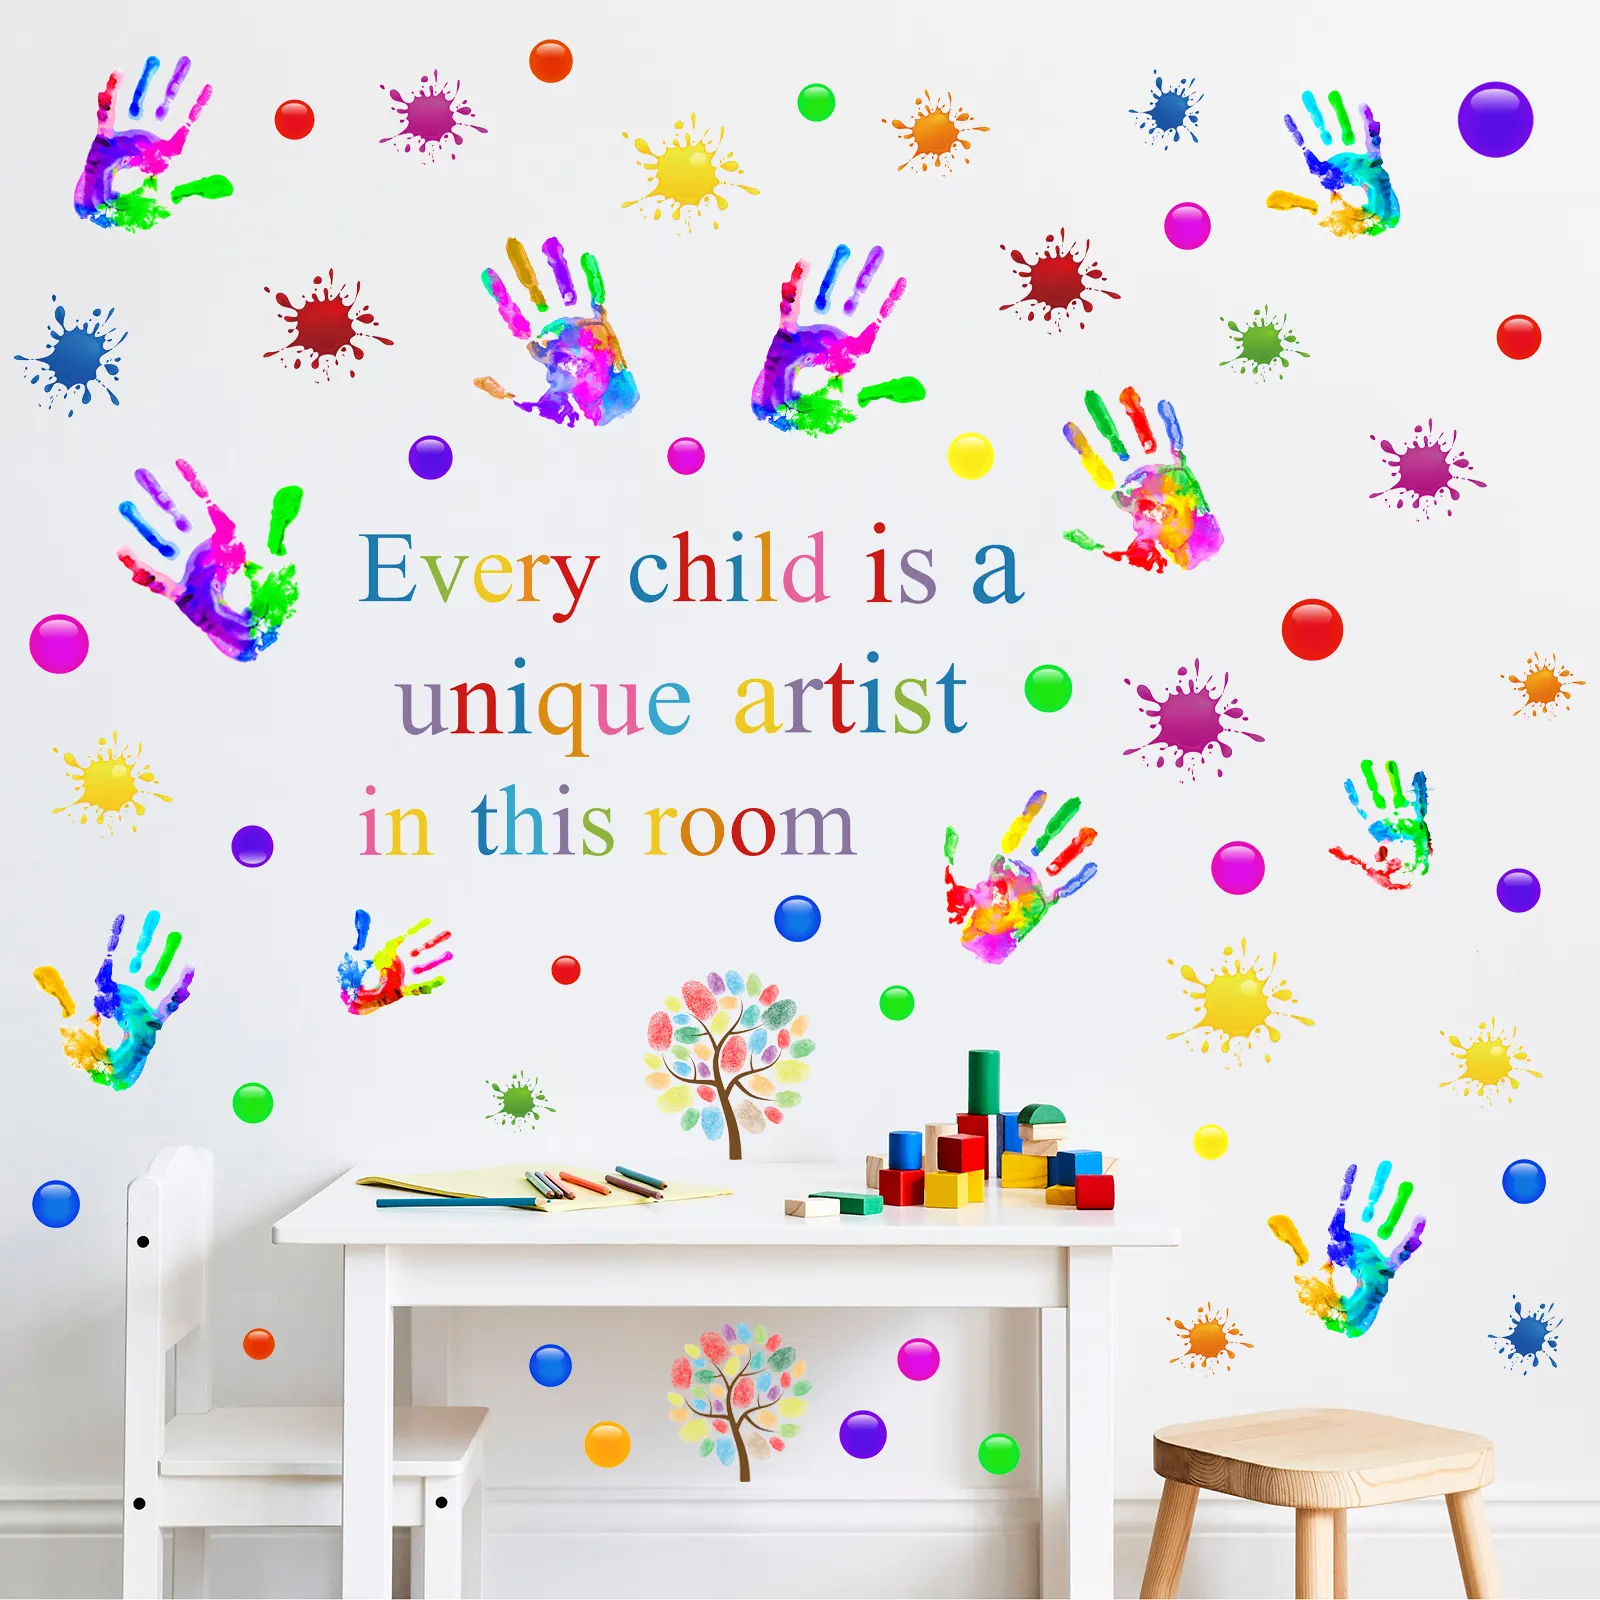 Colorful Inspirational Wall Decals Motvational Phrase Wall Stickers Positive Lettering Decal Paint Splatter Handprint Stickers